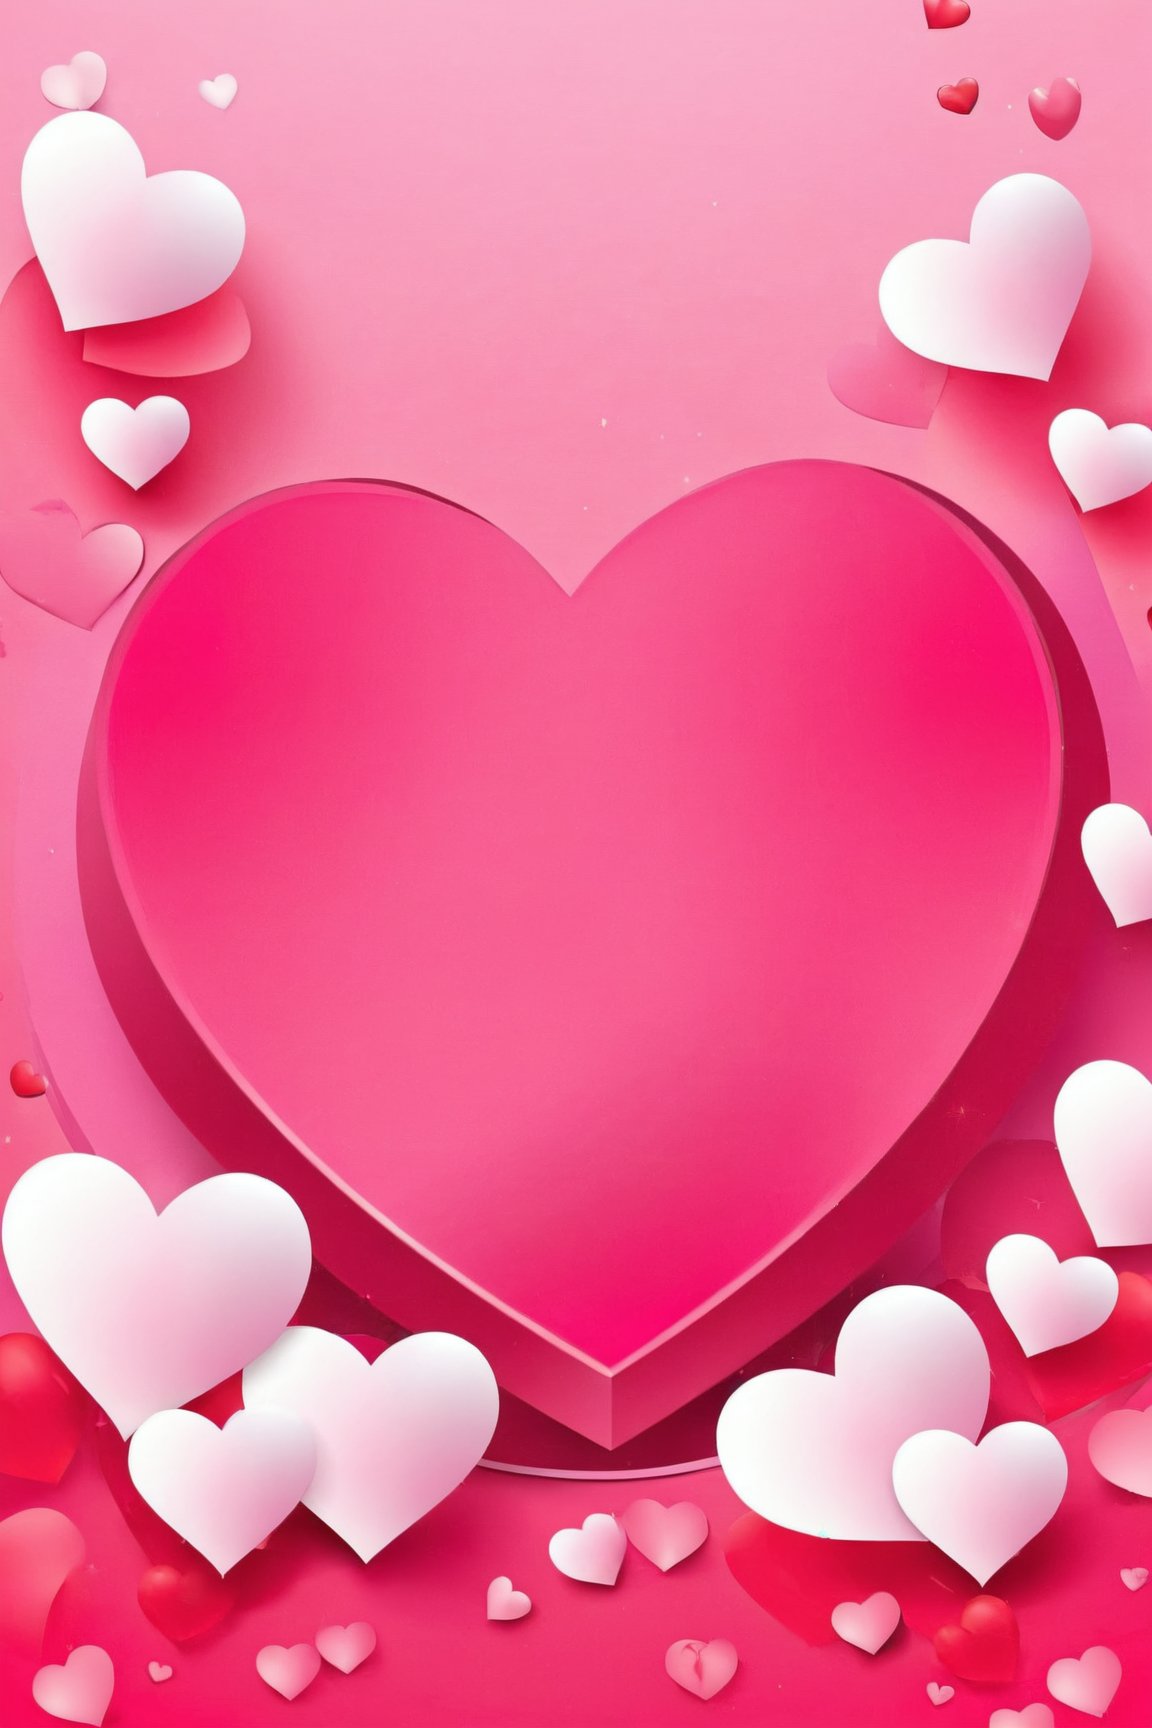 AiArtV,Valentines Day, simple background,heart,gradient,gradient background,no humans,pink background,pink theme,heart background